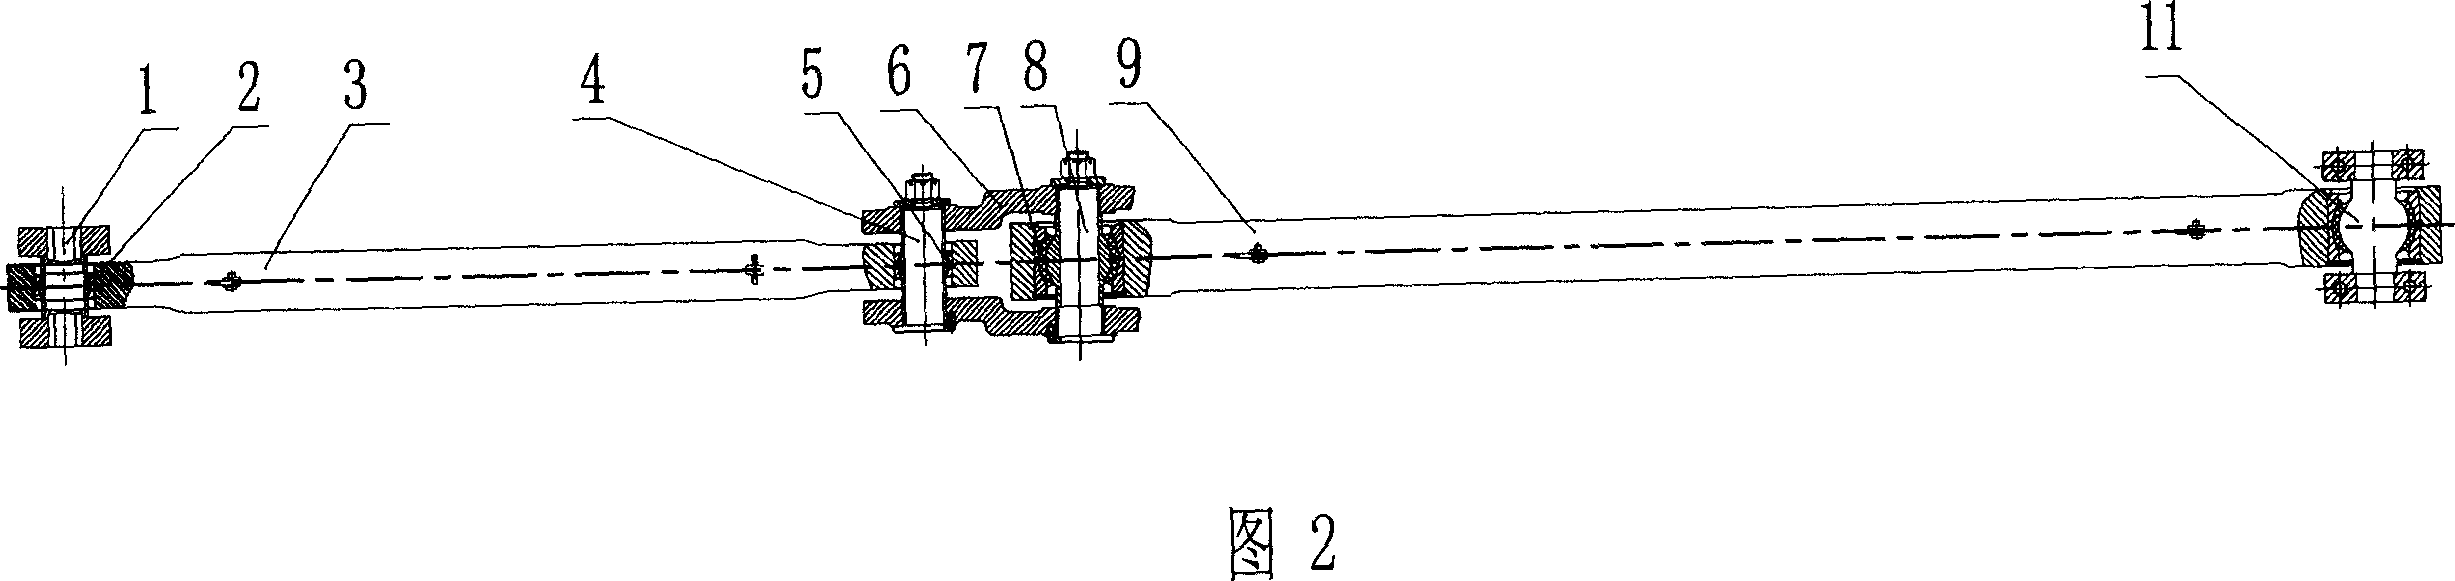 Composition type draw gear of locomotive